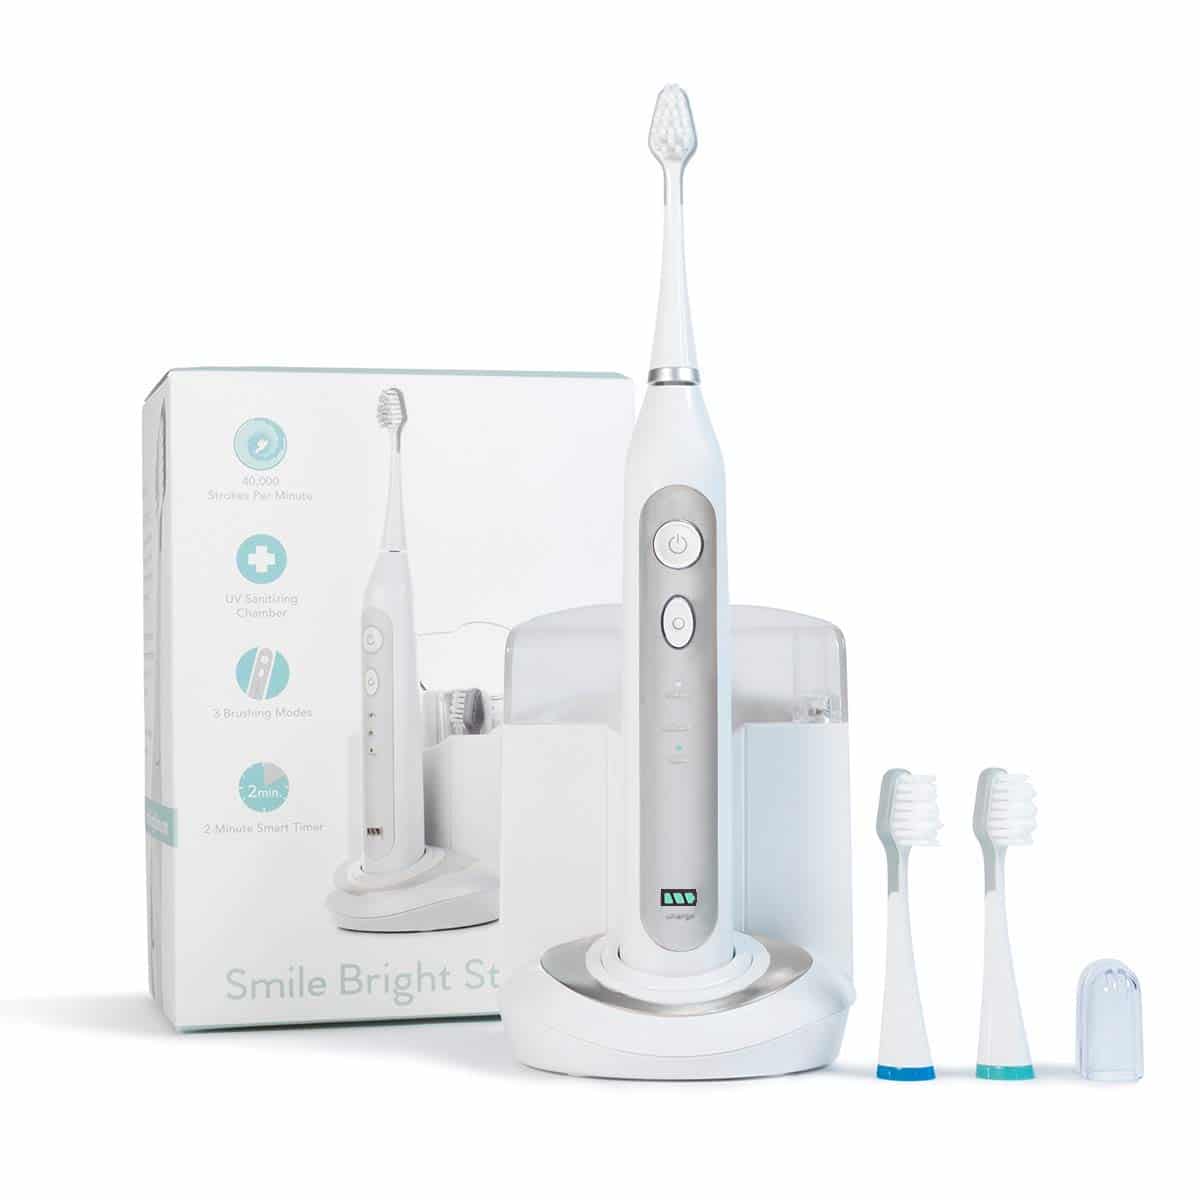 Smile Bright Store Platinum Electronic Sonic Toothbrush